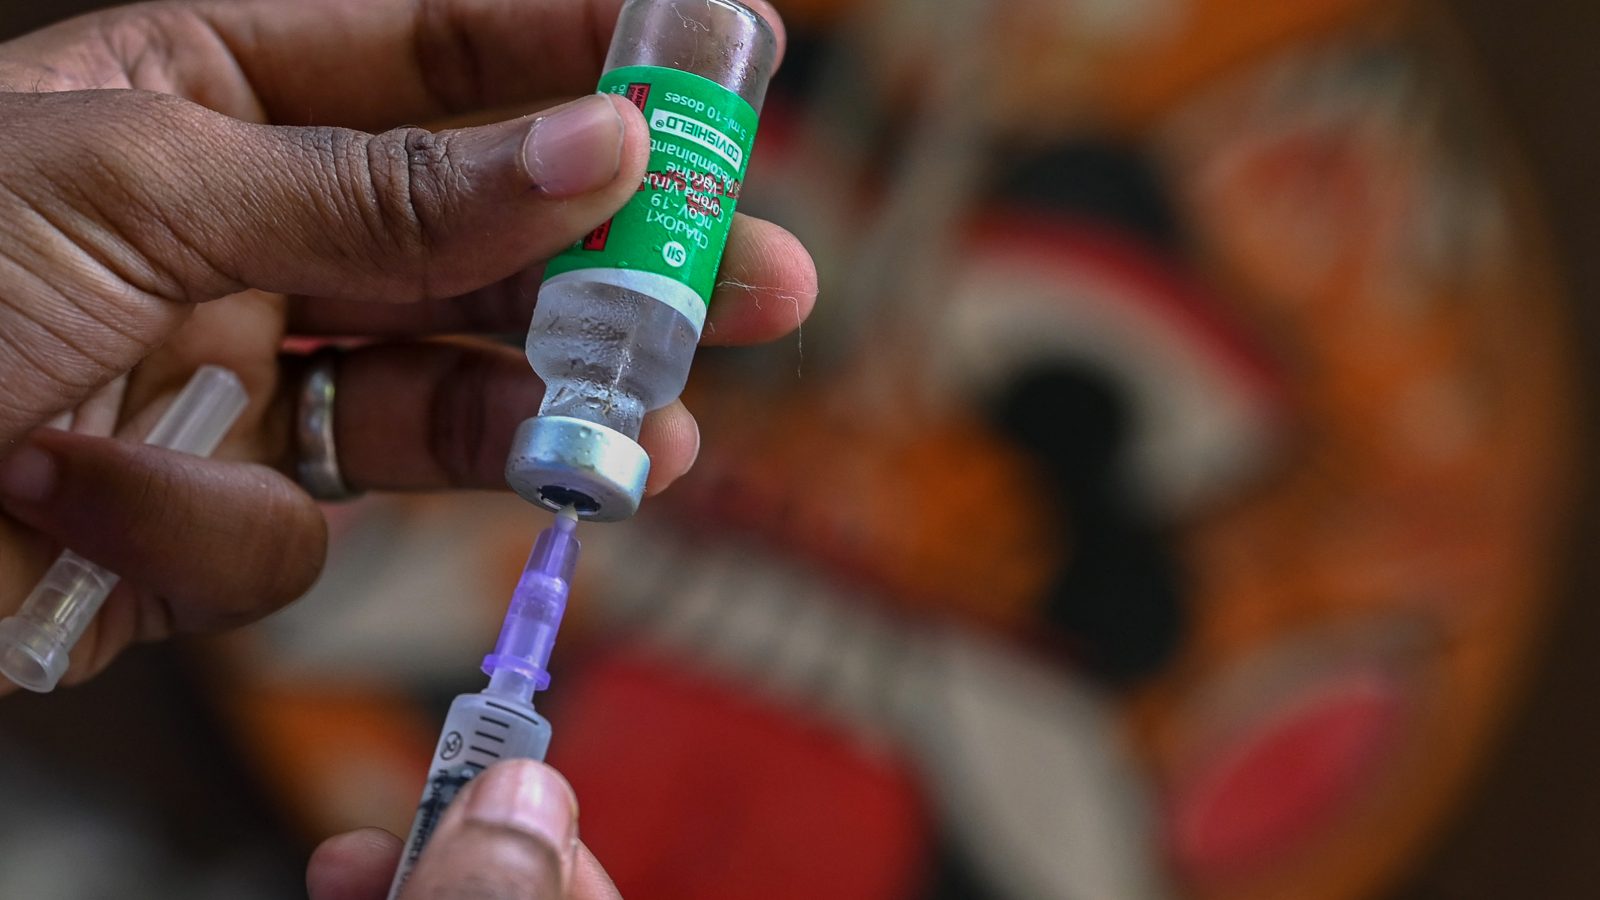 Why does India’s Cowin app keep sending fake vaccination certificates?